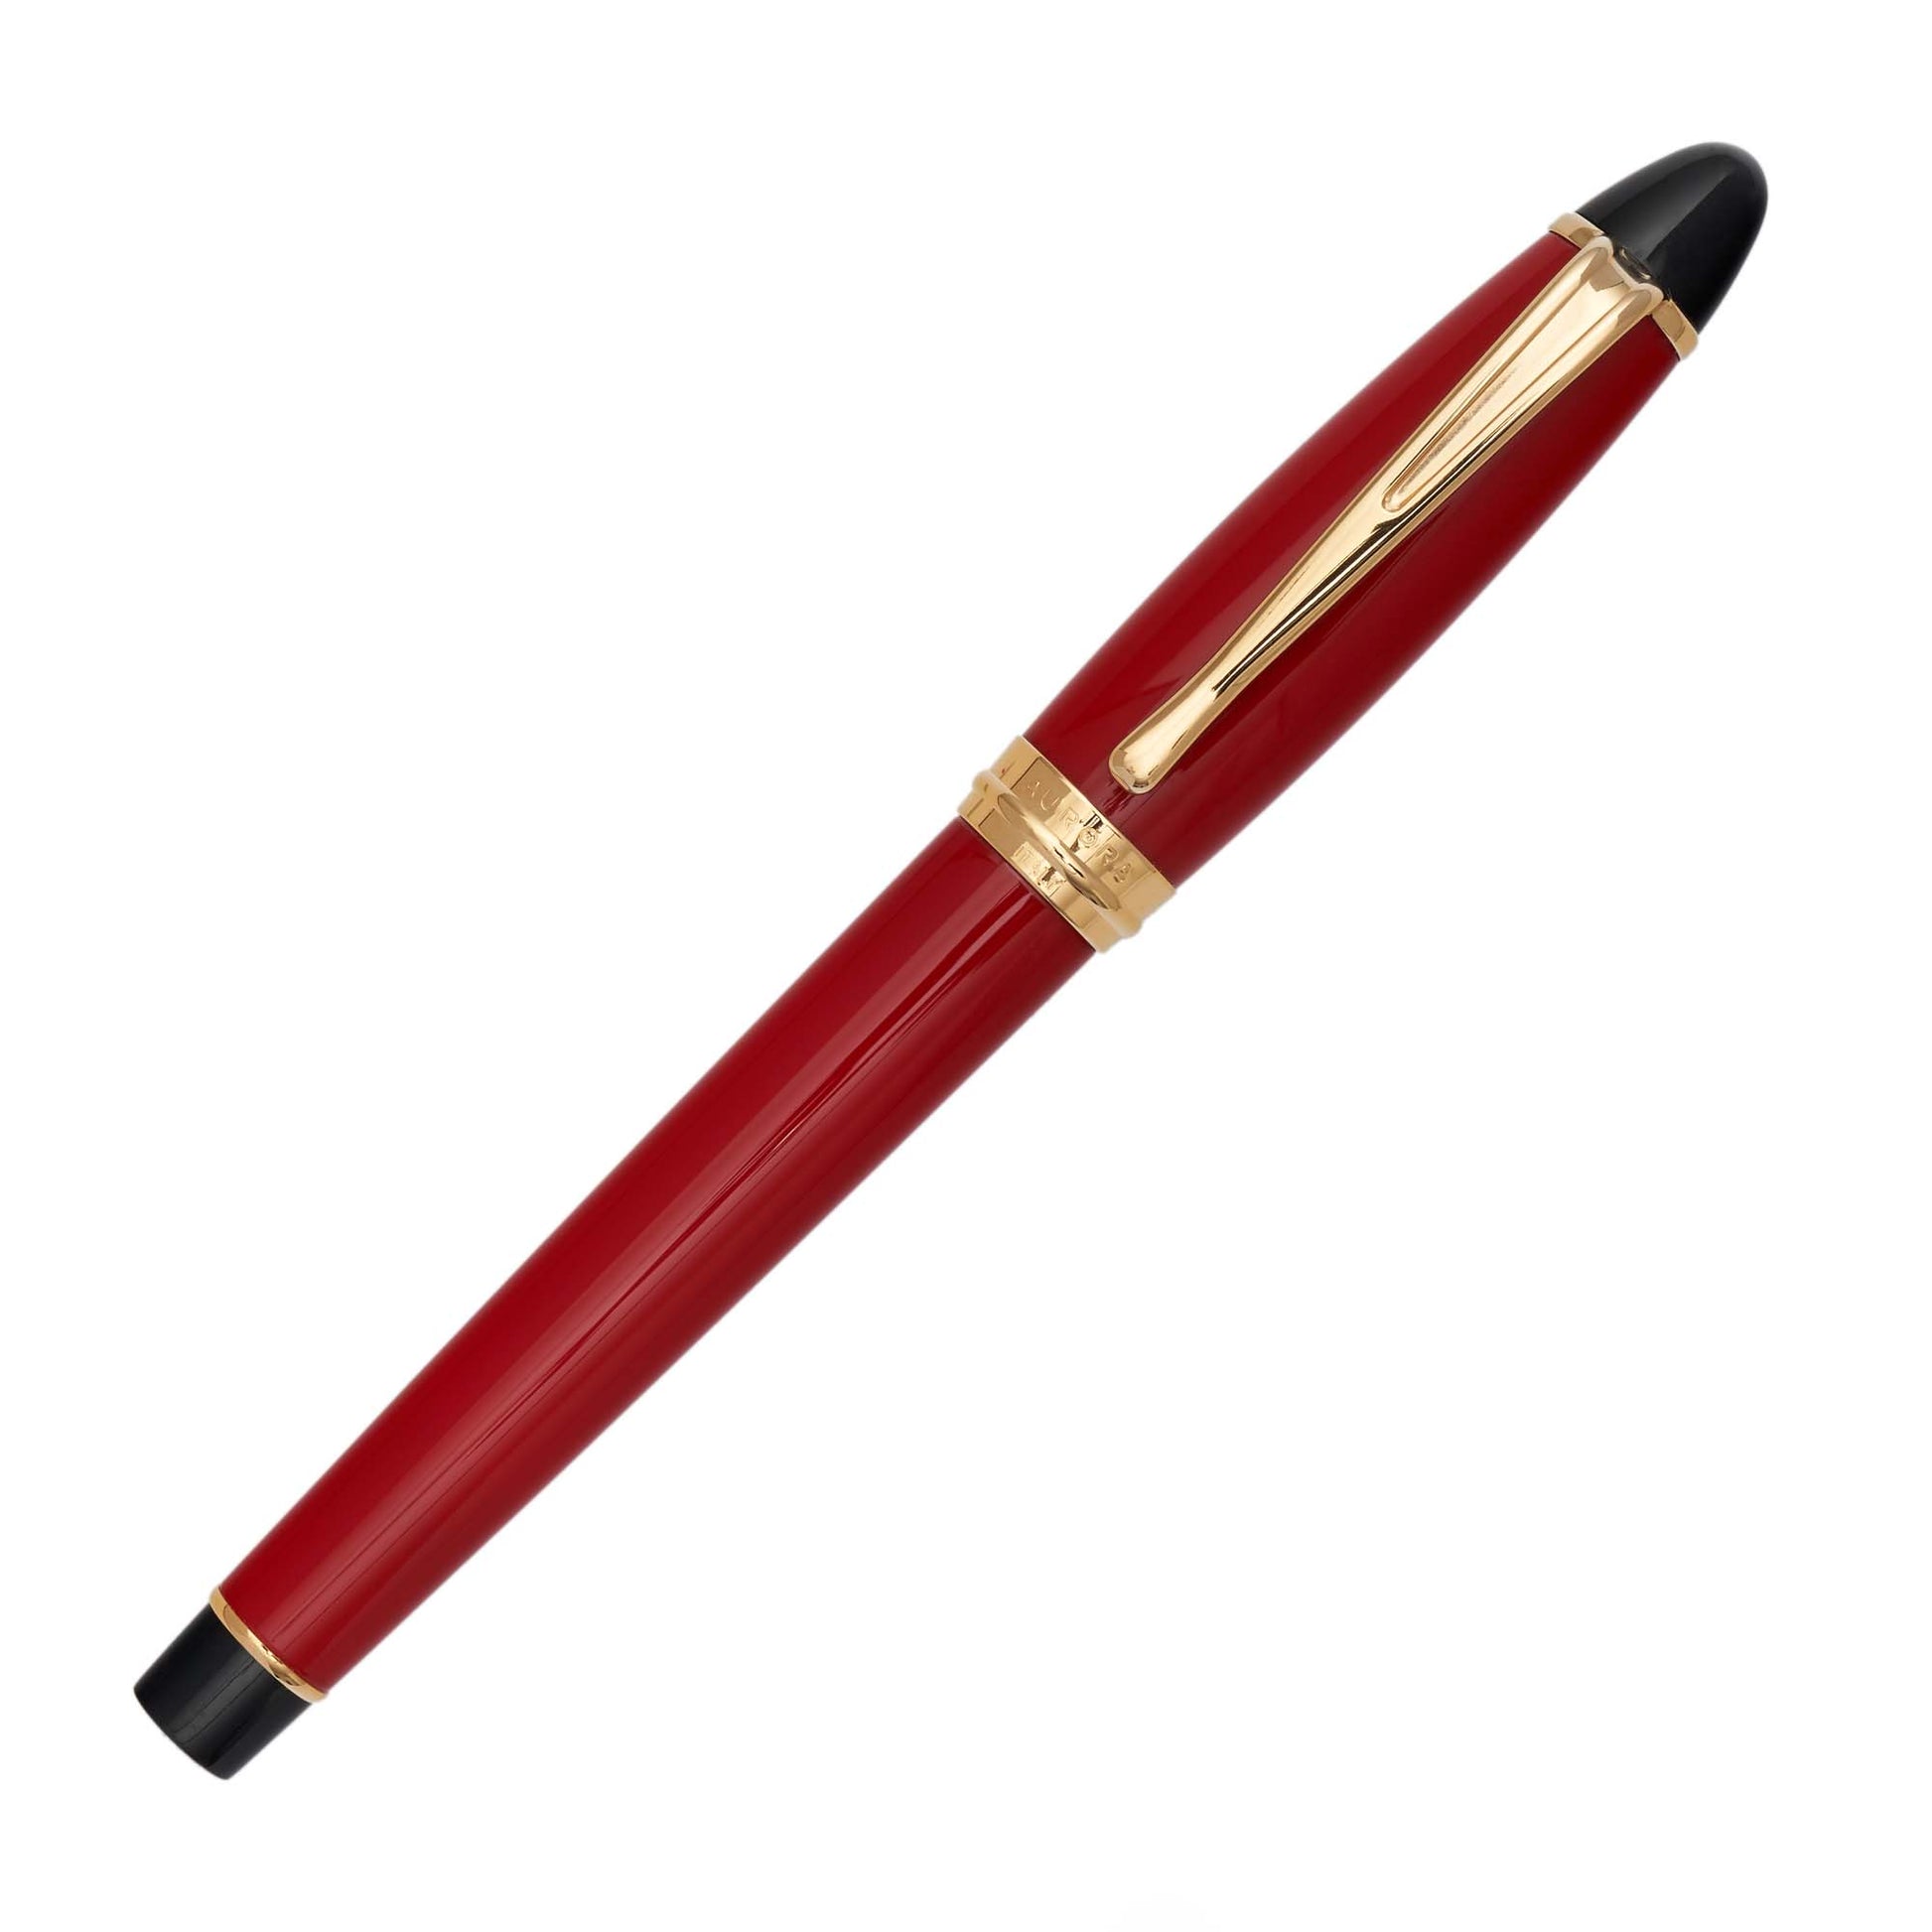 Aurora Ipsilon Fountain Pen Made in Italy Capped Red and Gold